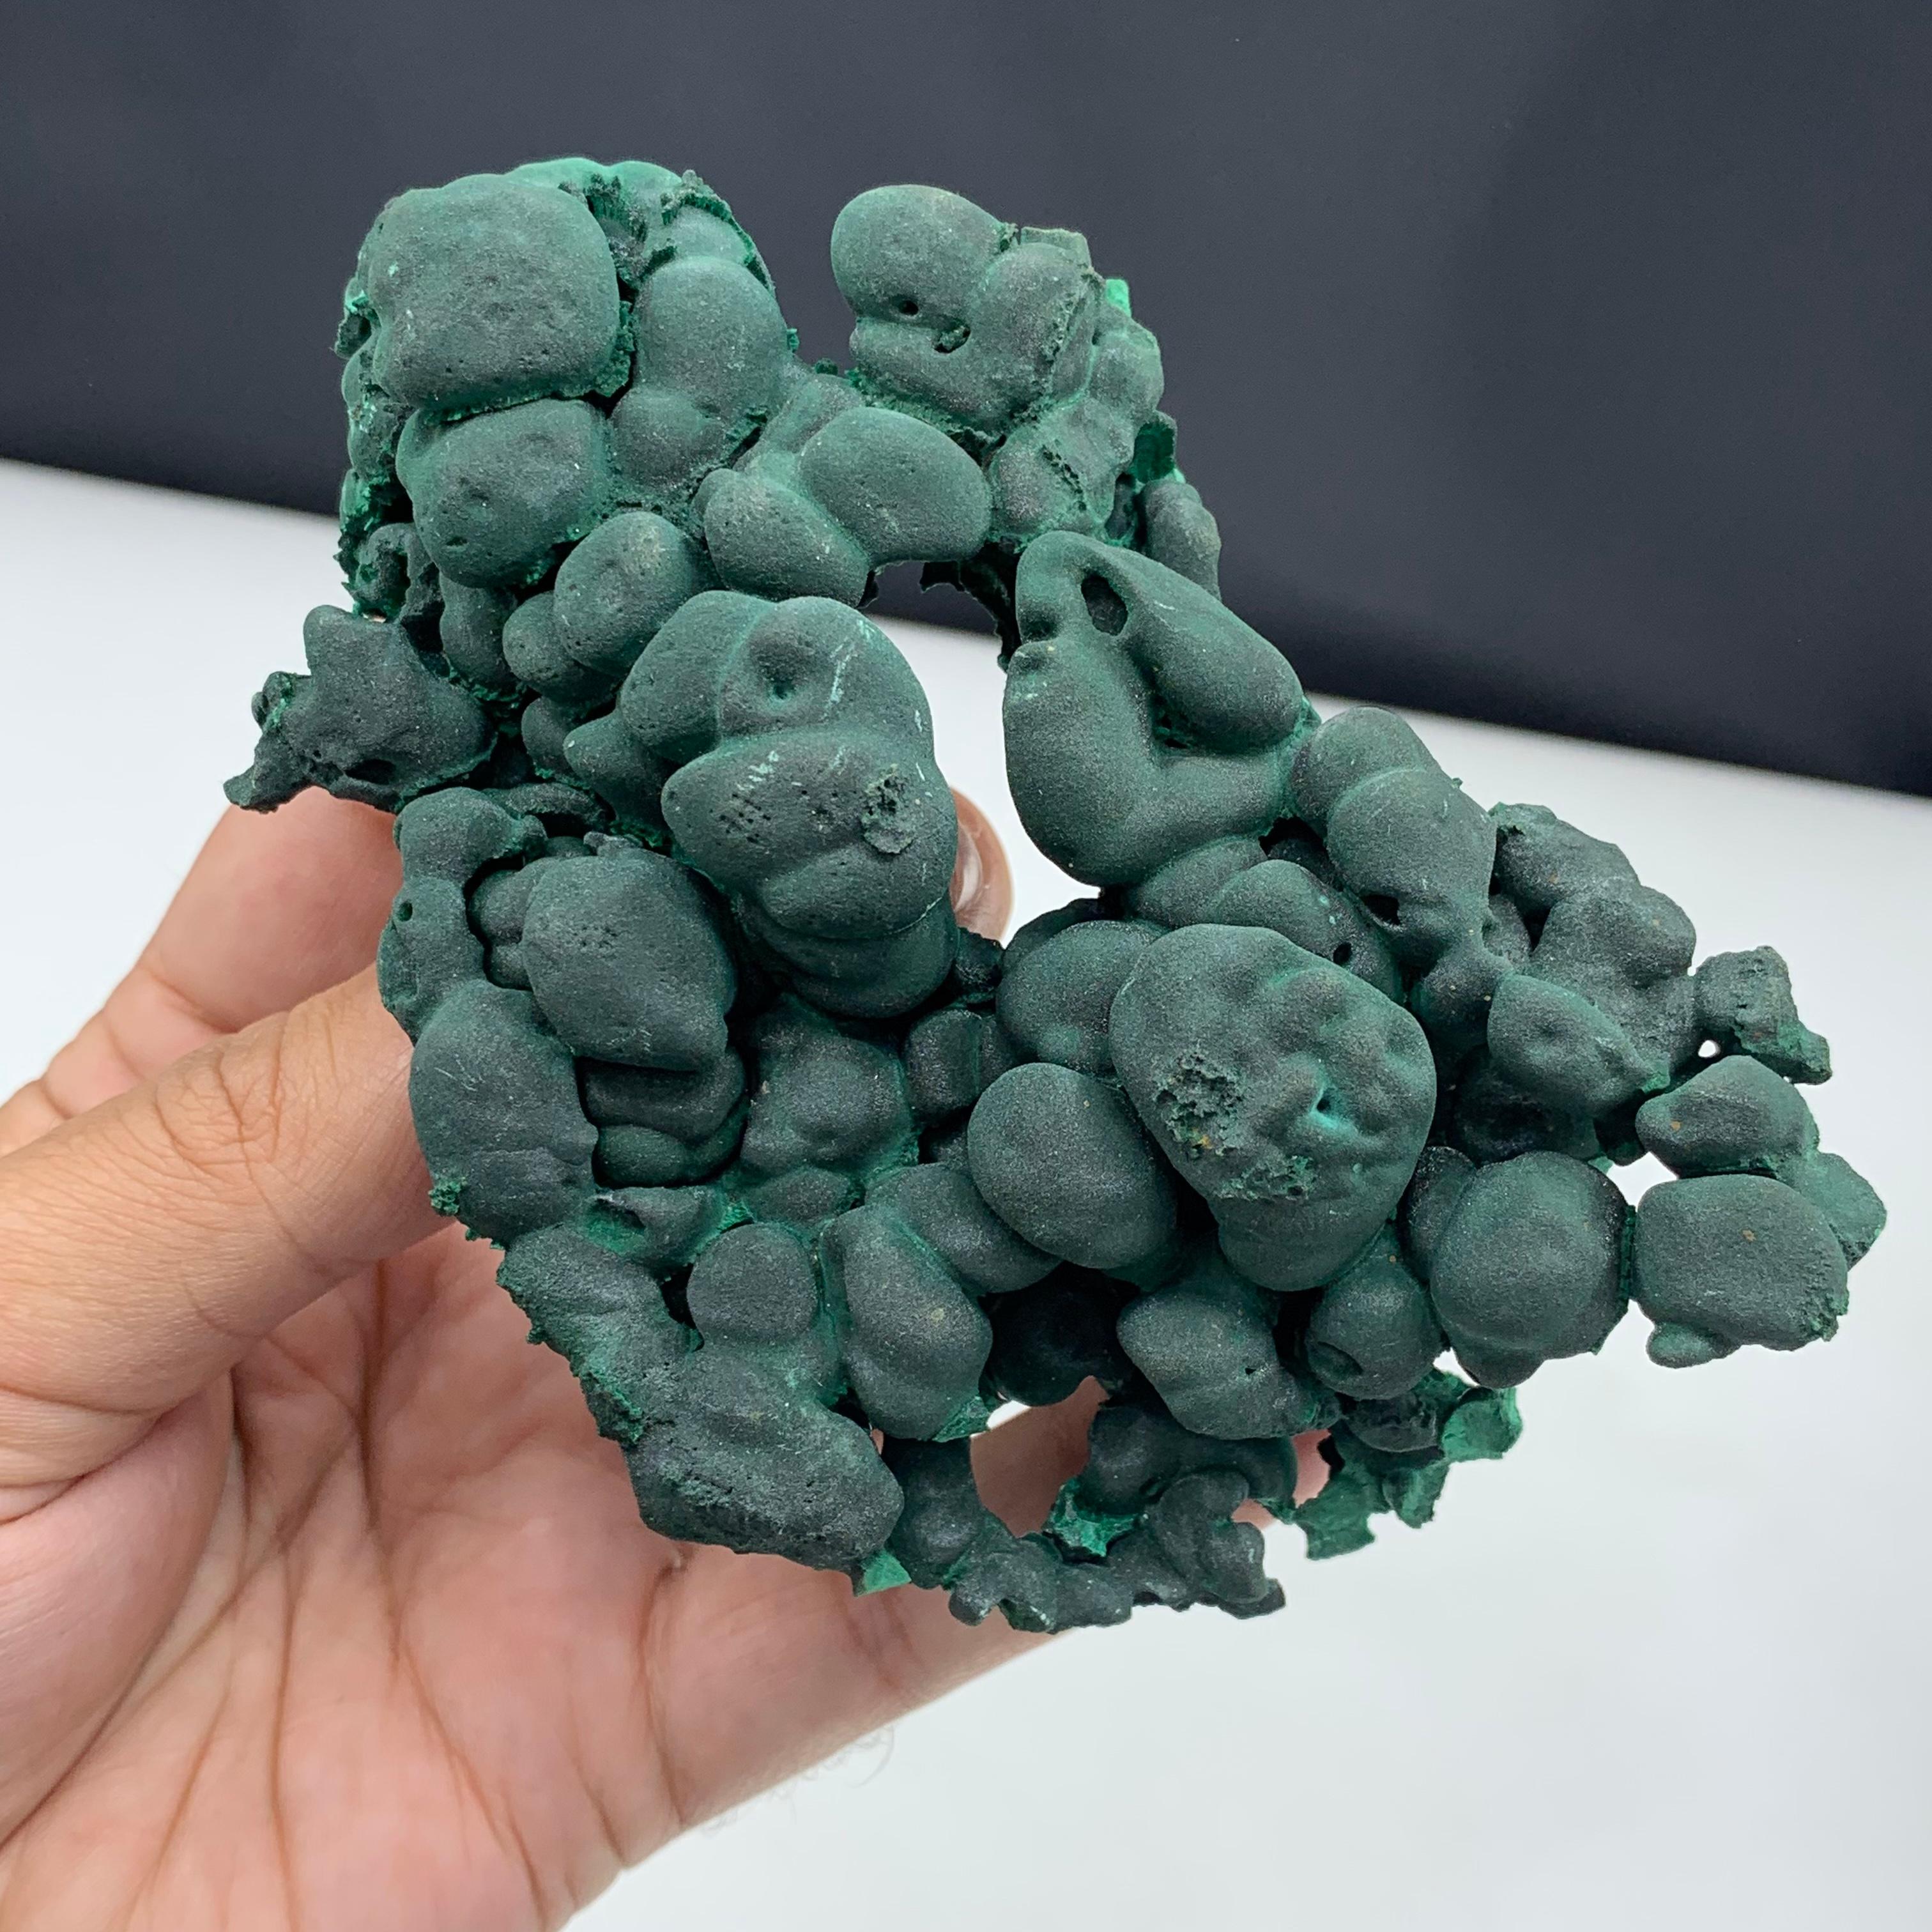 Adam Style 291 Gram Incredible Alien Eye Malachite Cluster Specimen From Guangdong, China  For Sale